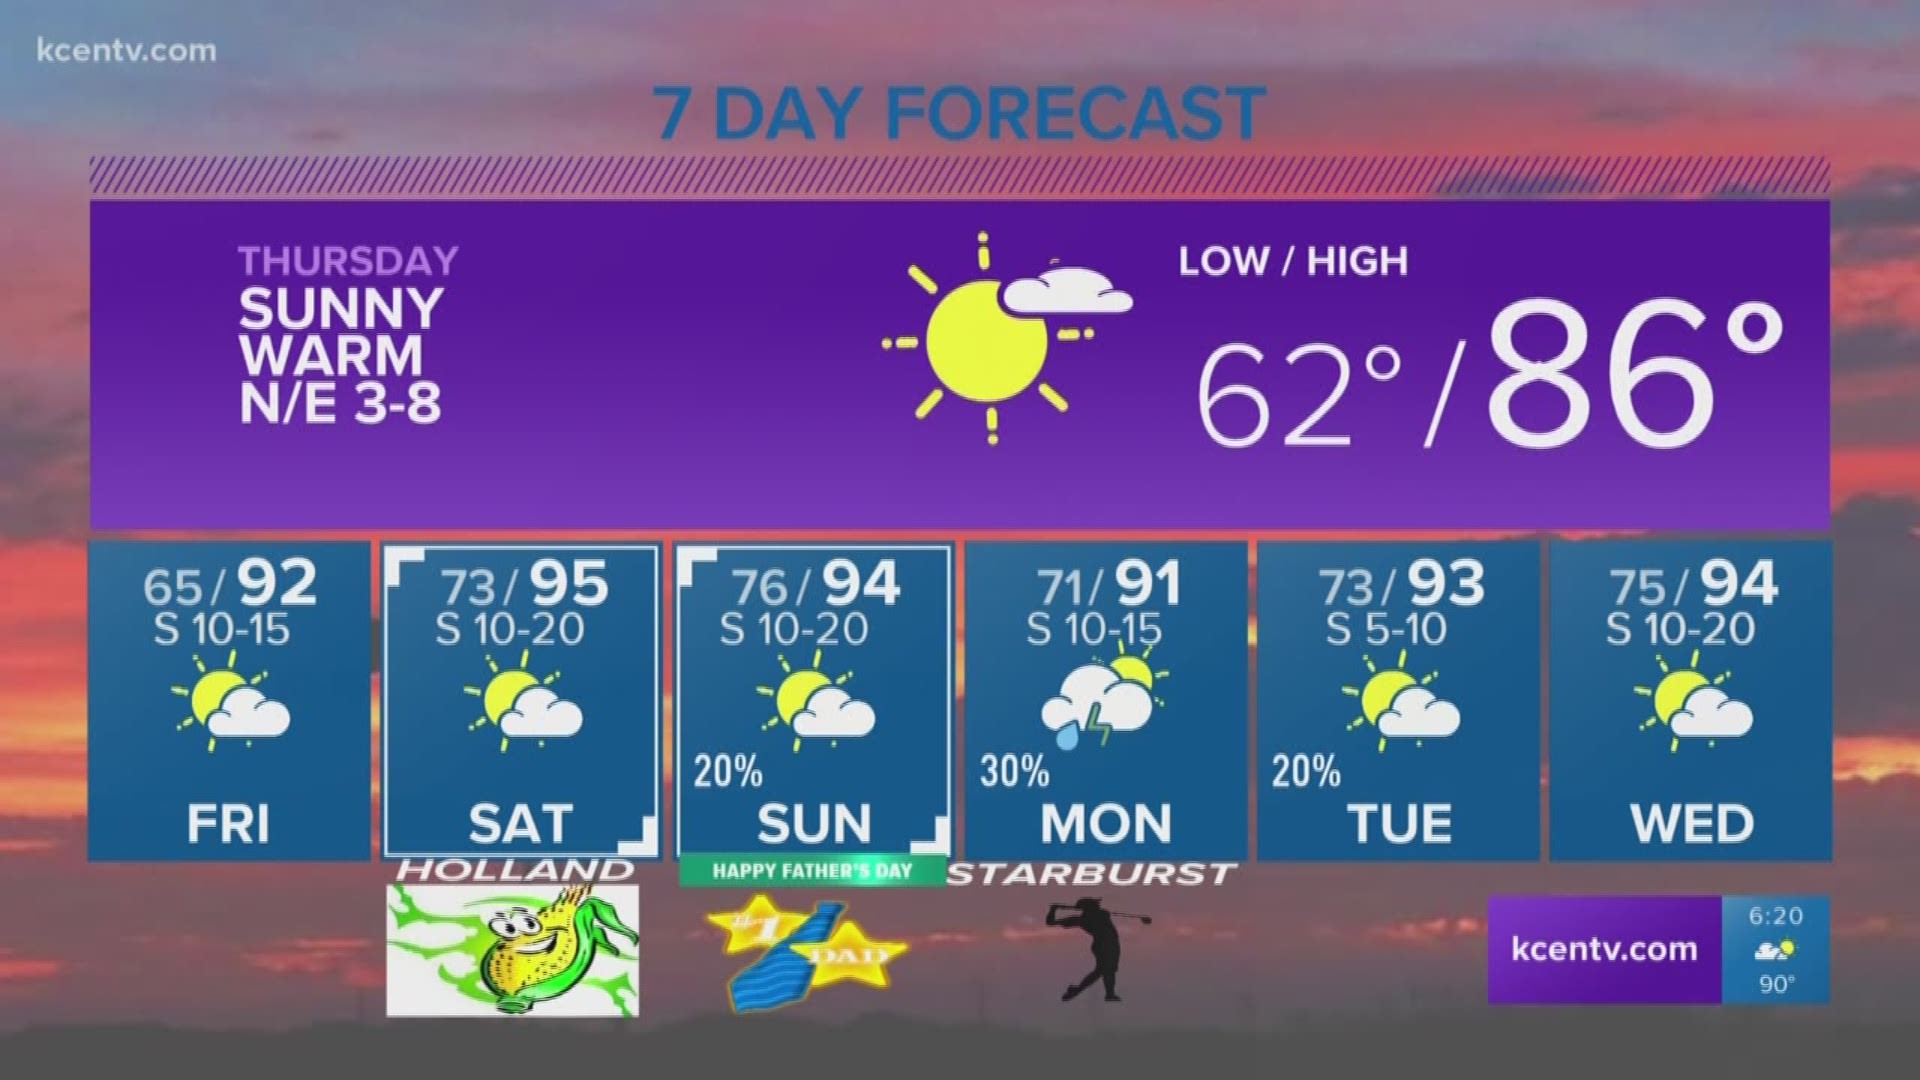 Chief meteorologist Andy Andersen says Thursday's high will be 86 degrees.